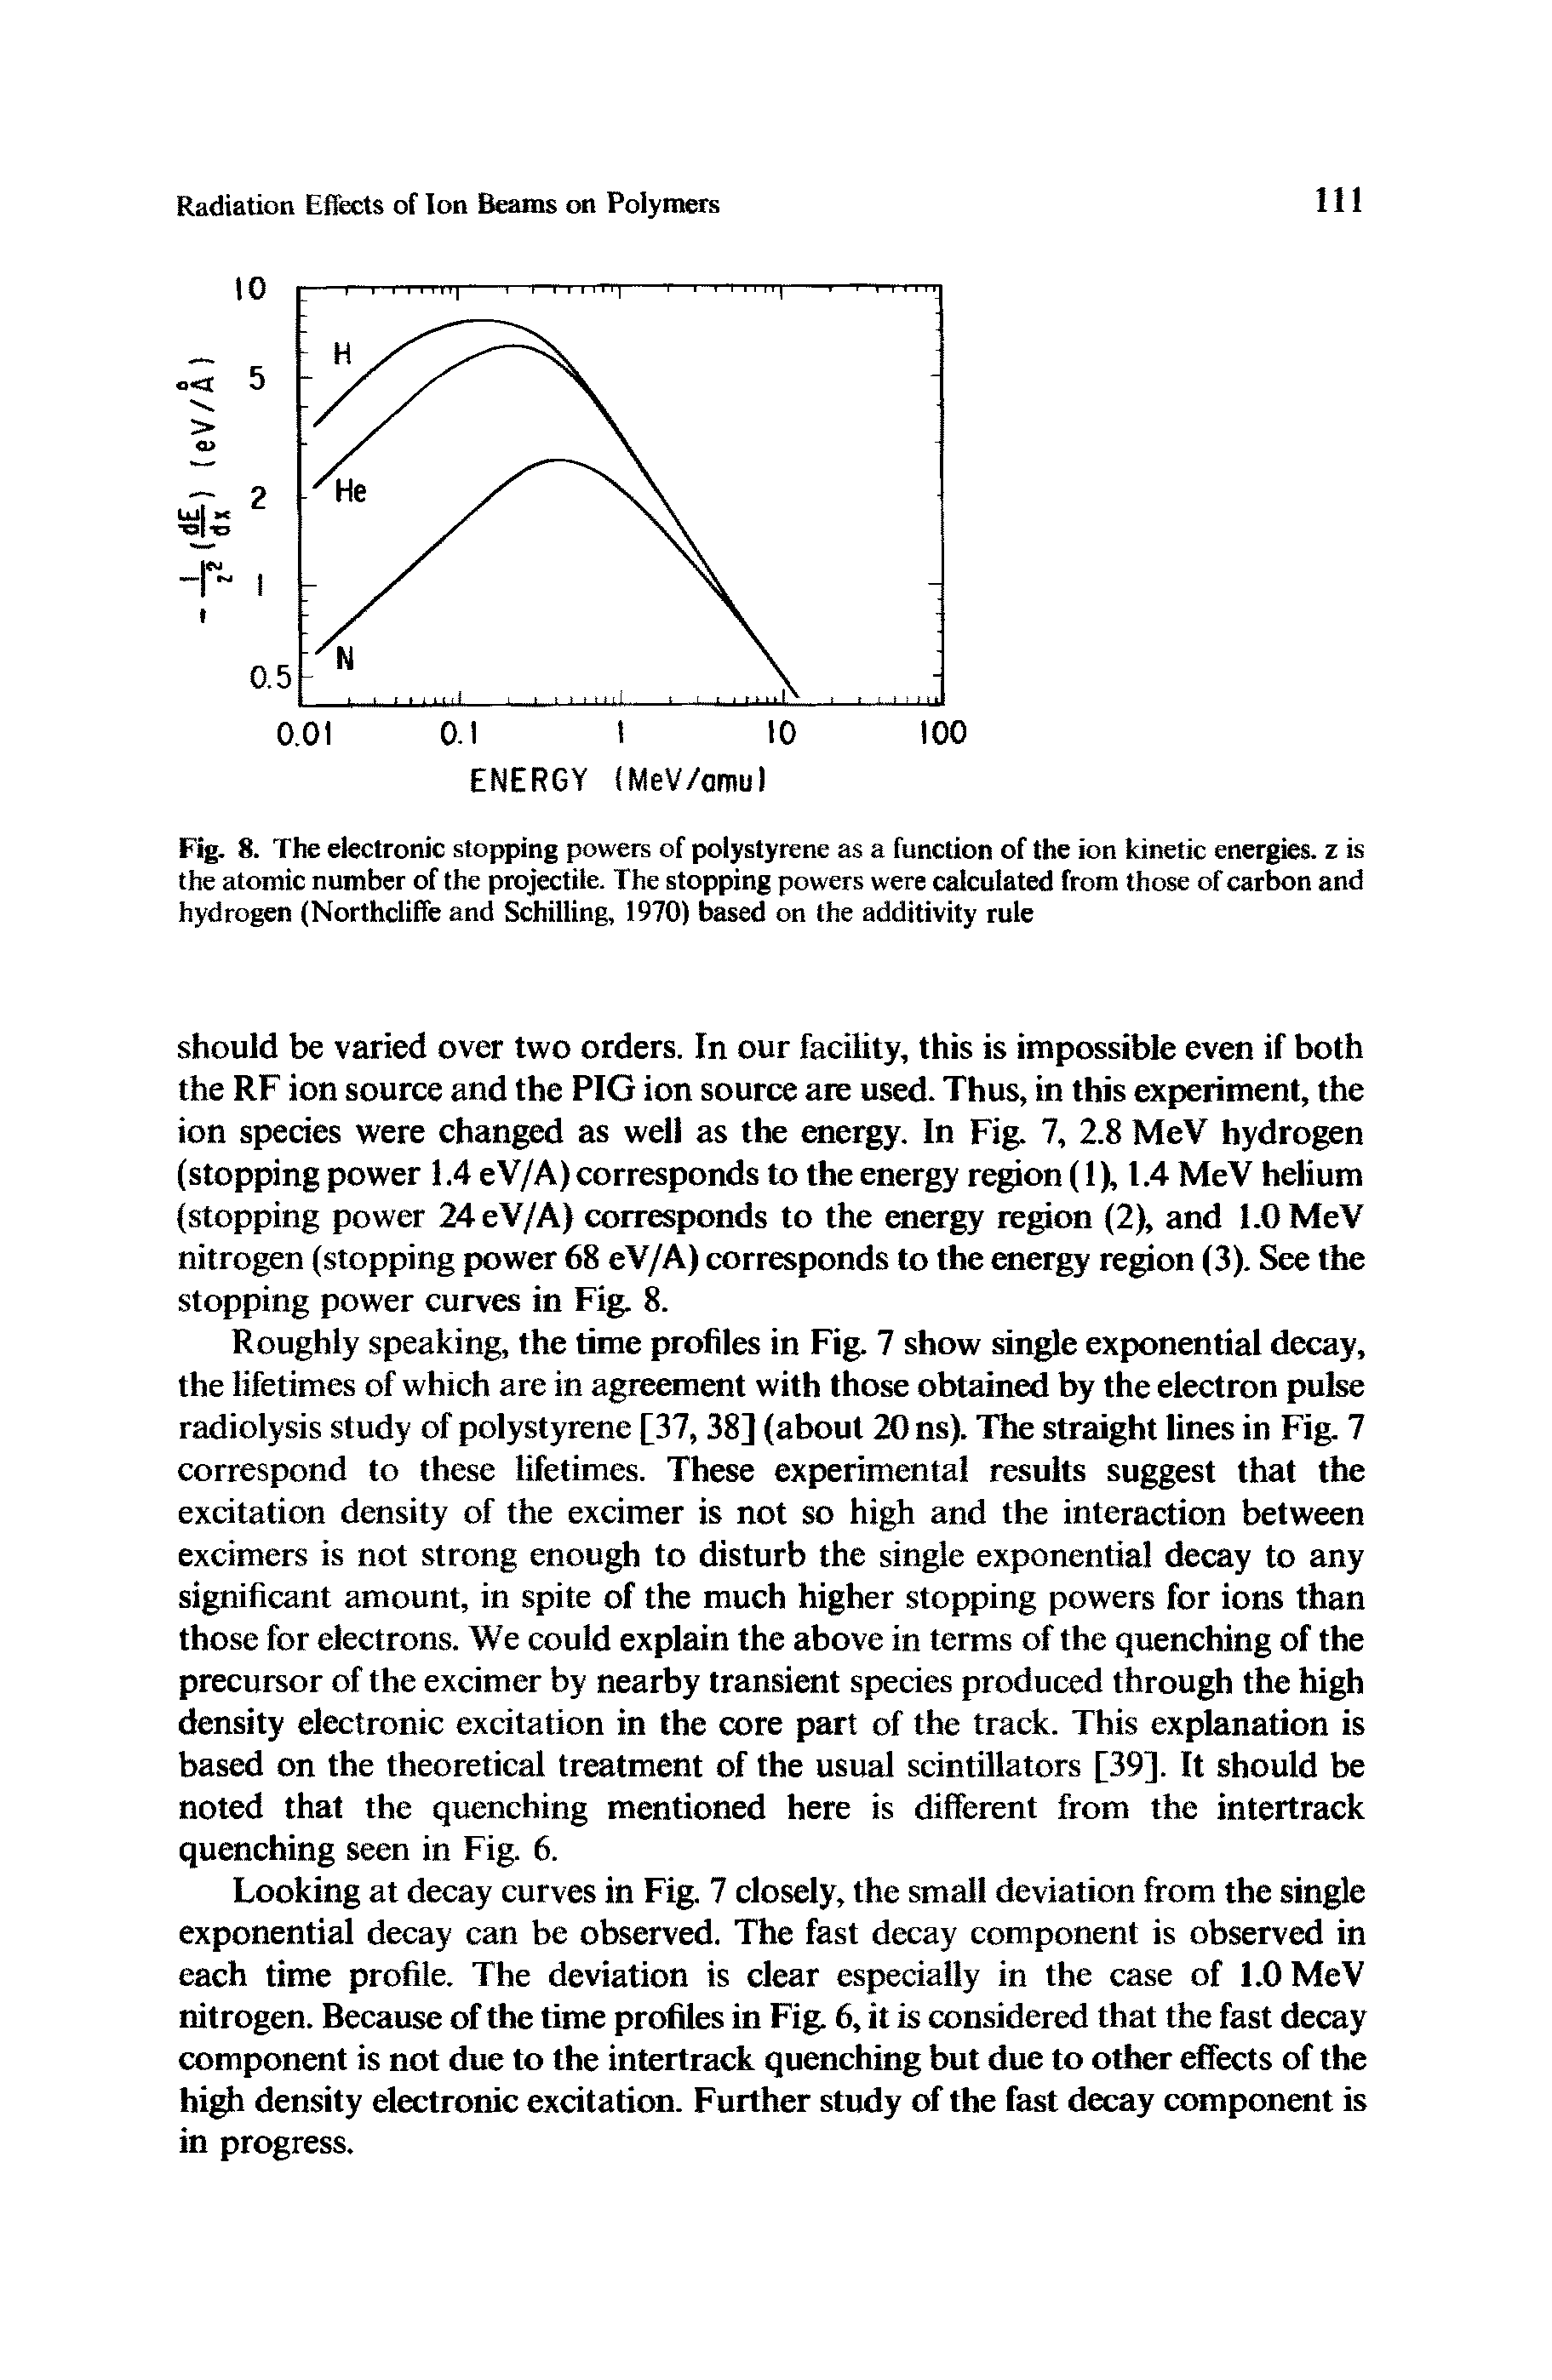 Fig. 8. The electronic stopping powers of polystyrene as a function of the ion kinetic energies, z is the atomic number of the projectile. The stopping powers were calculated from those of carbon and hydrogen (Northcliffe and Schilling, 1970) based on the additivity rule...